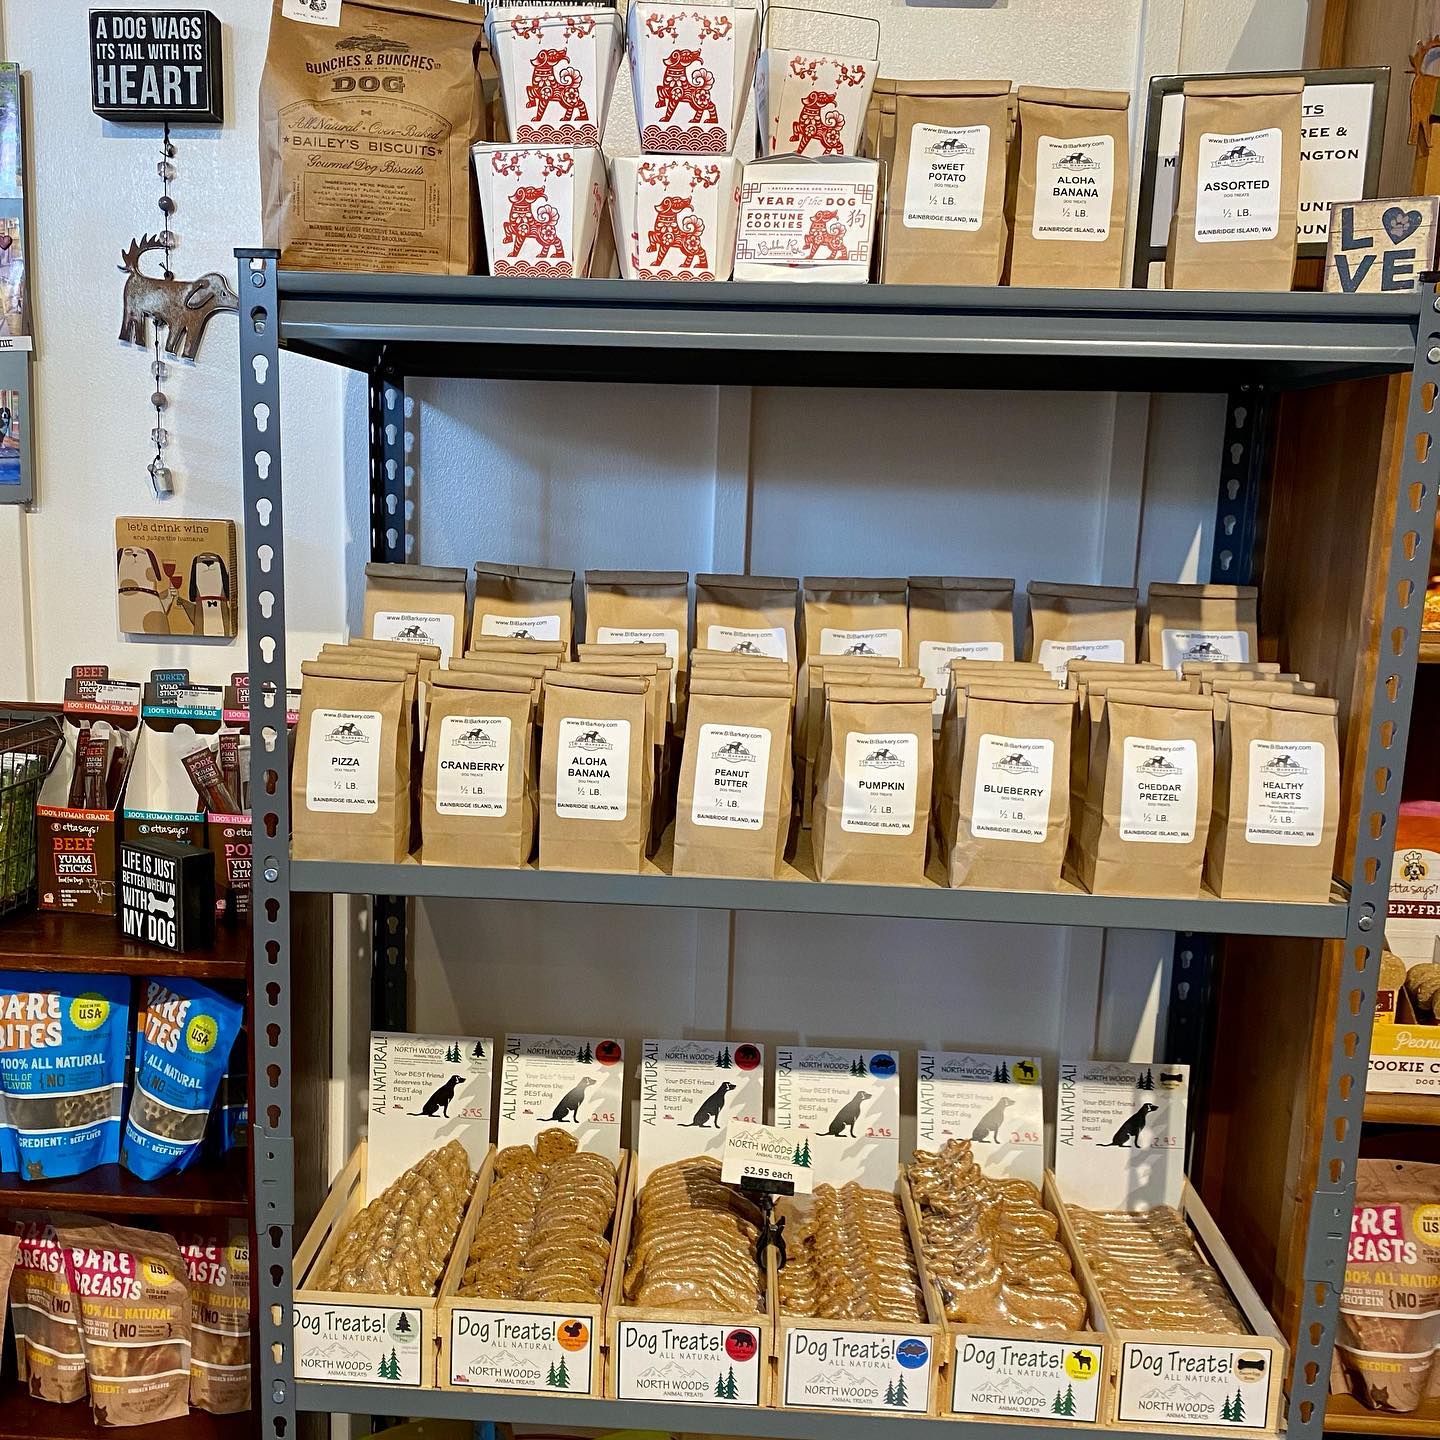 Dog treats for purchase inside store